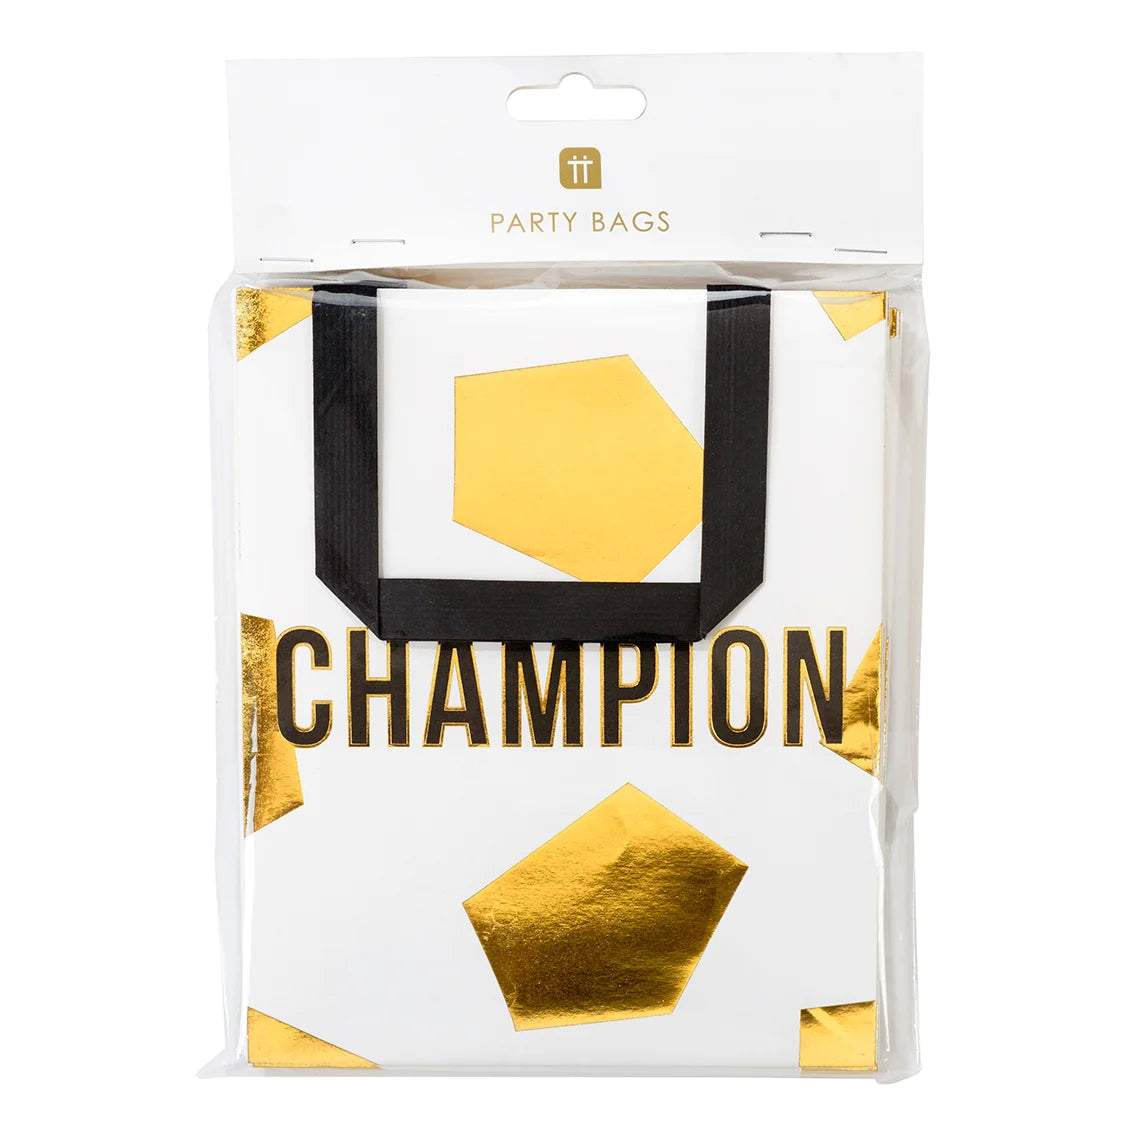 SOCCER CHAMPIONS PARTY BAGS